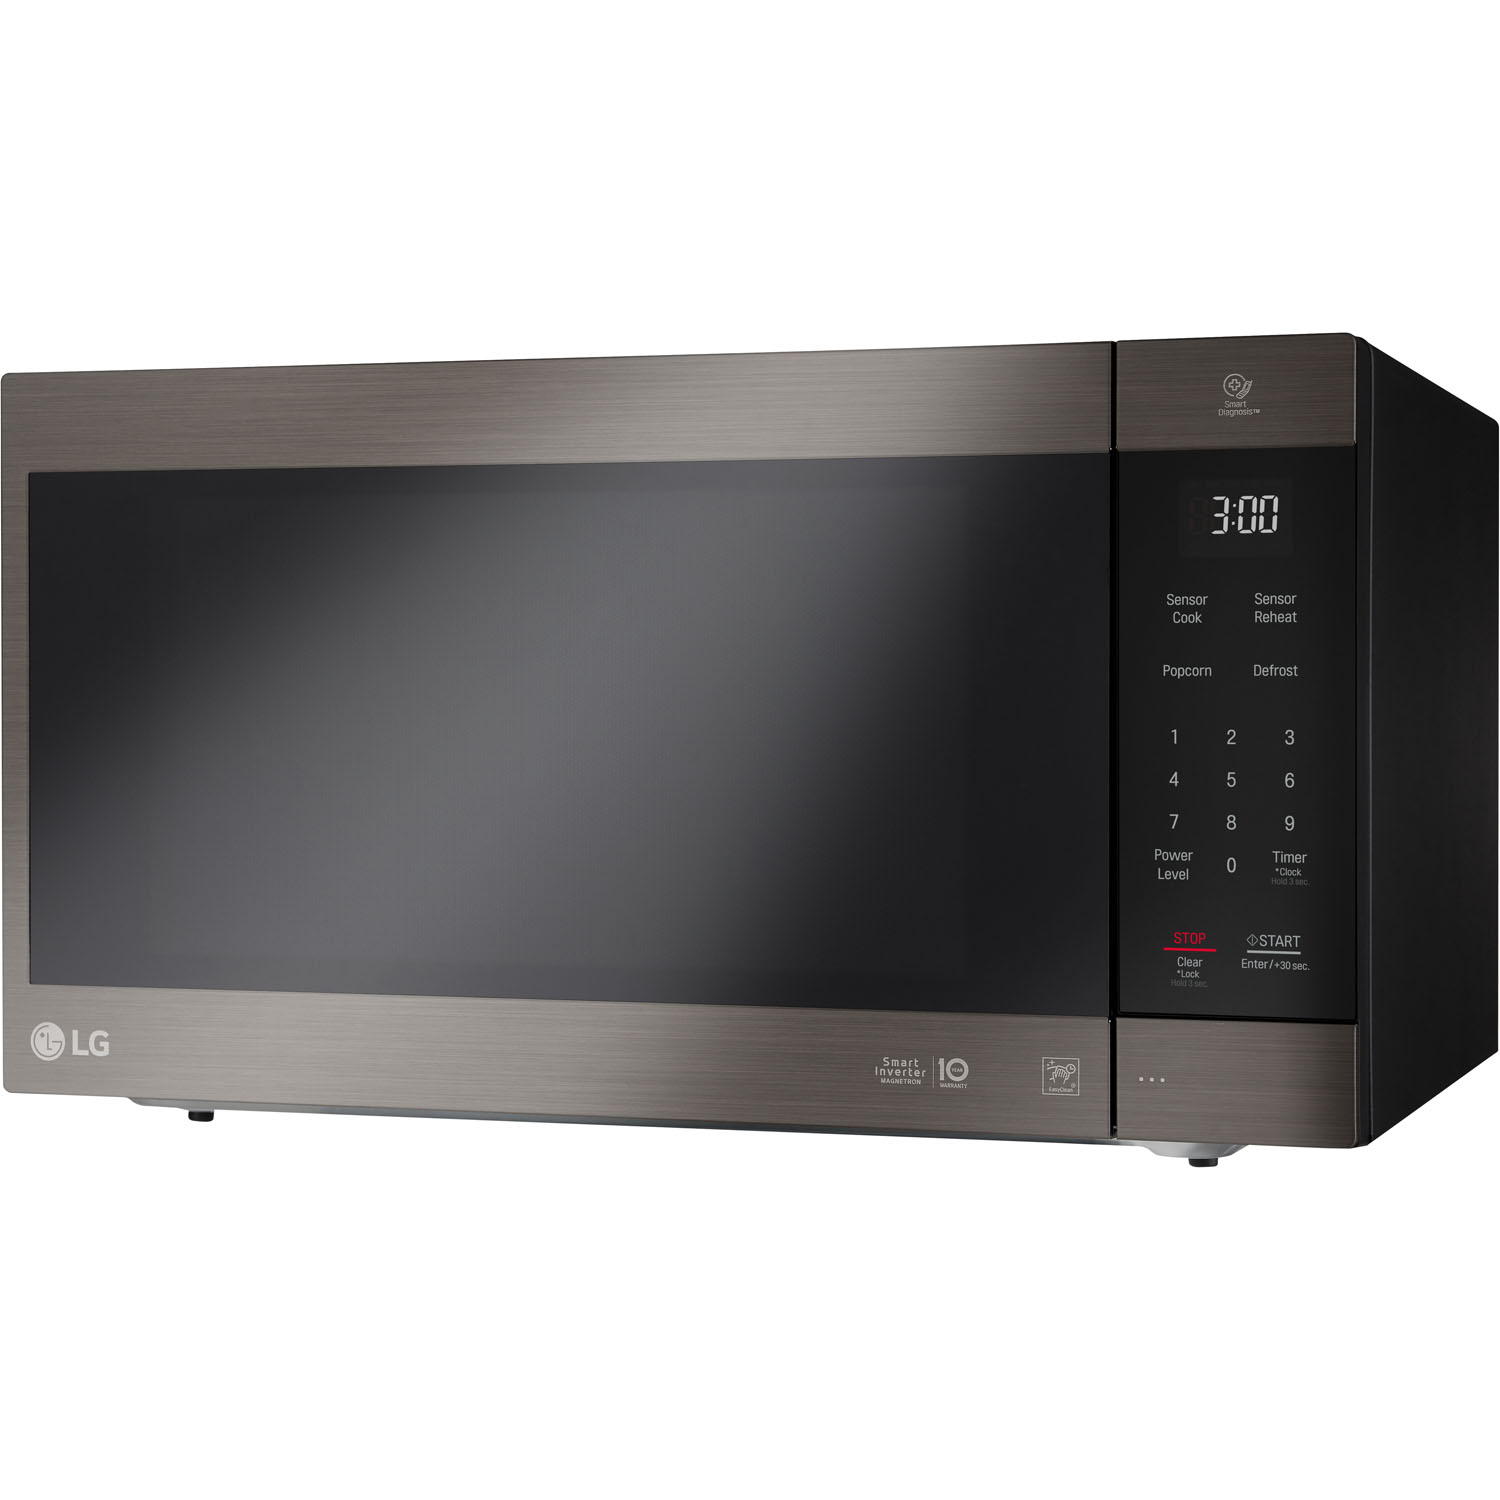 LG NeoChef 2.0 Cu. Ft. 1200W Countertop Microwave, Black Stainless Steel - image 5 of 8